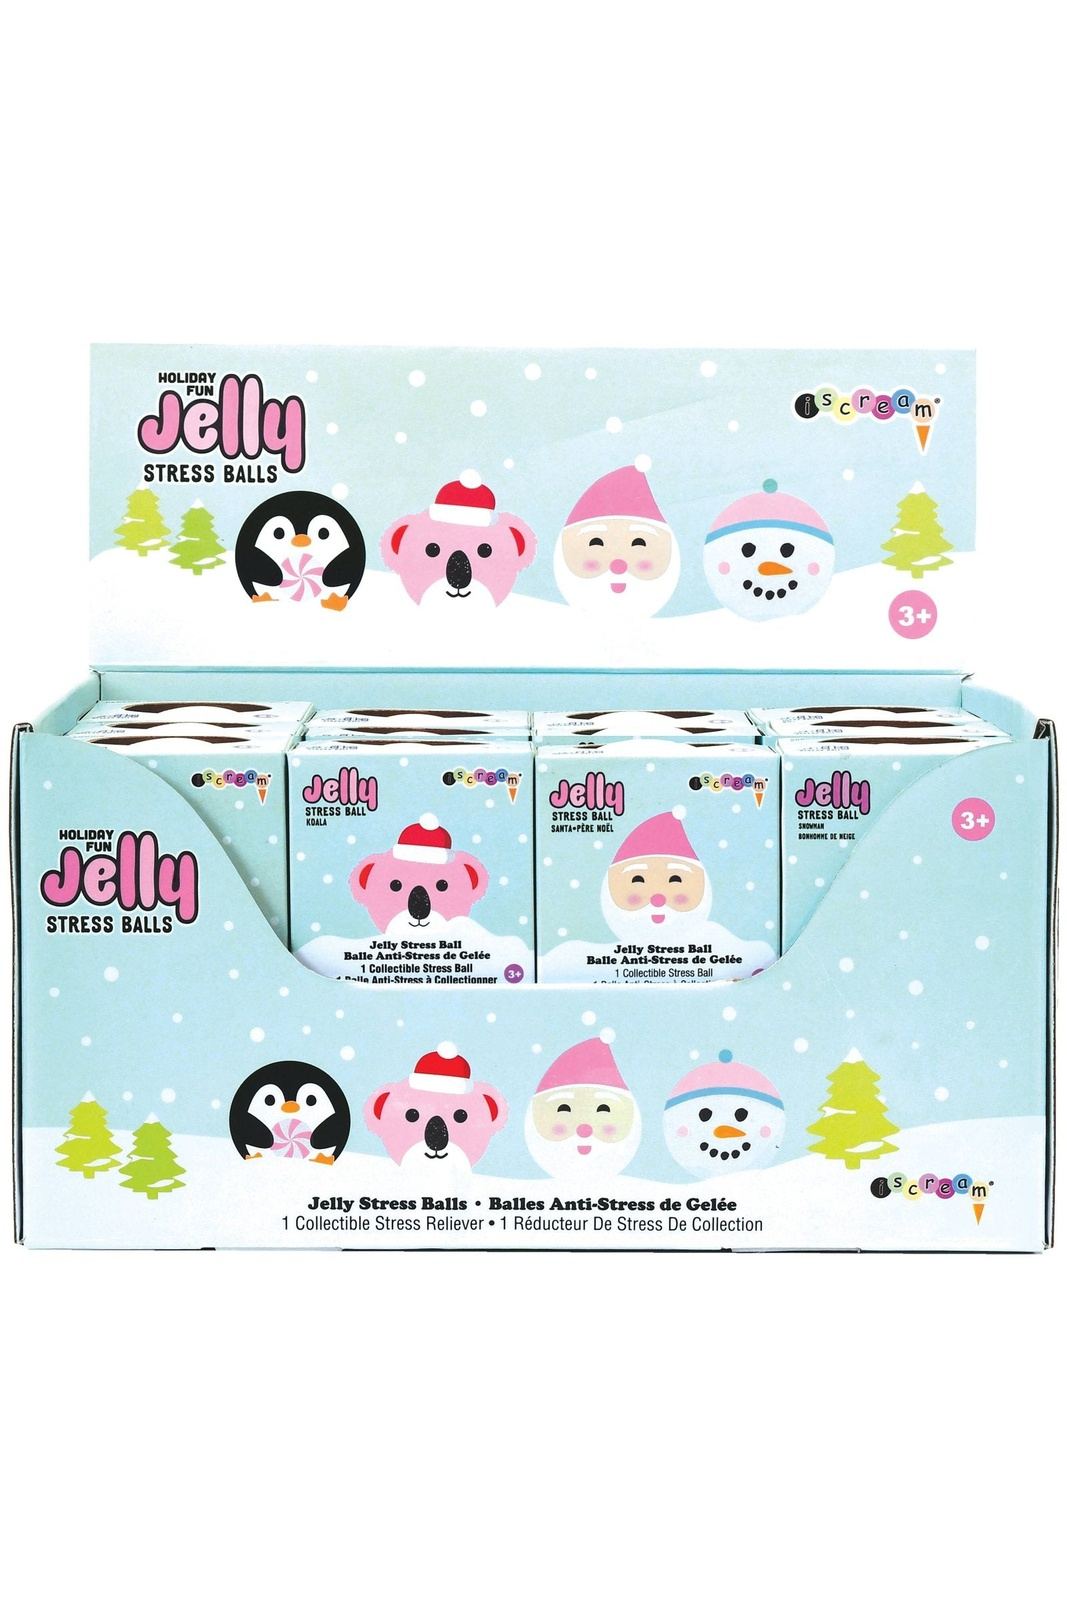 Holiday Stress Jelly Ball Tea for Three: A Children's Boutique